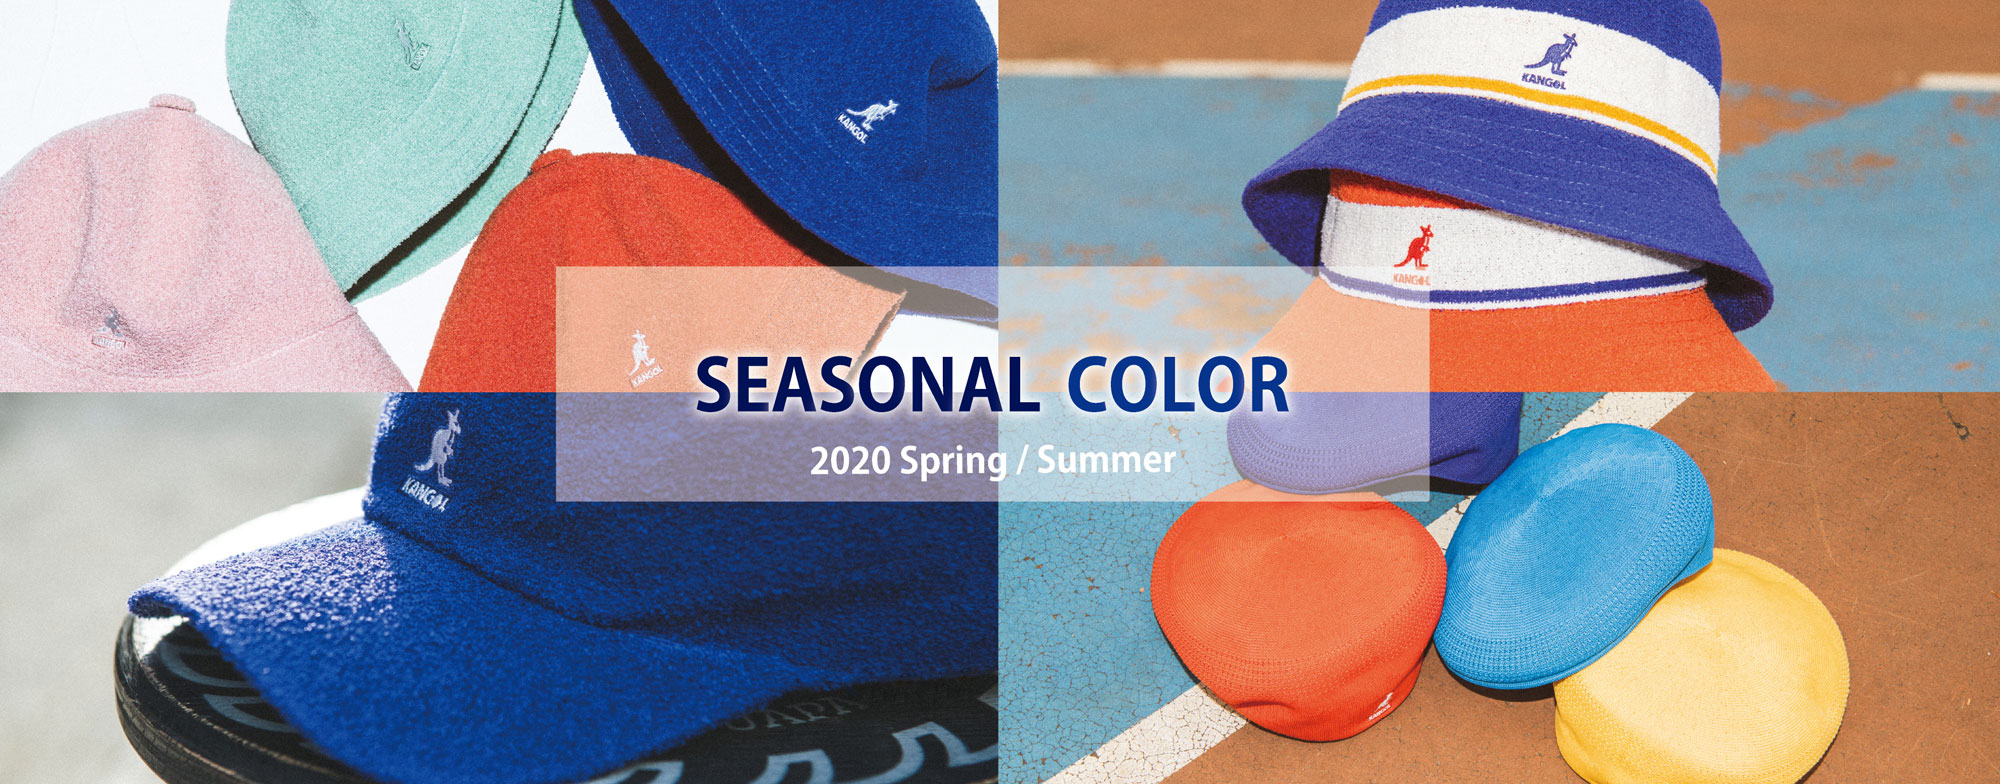 SEASONAL NEW COLORS FOR 2020SS